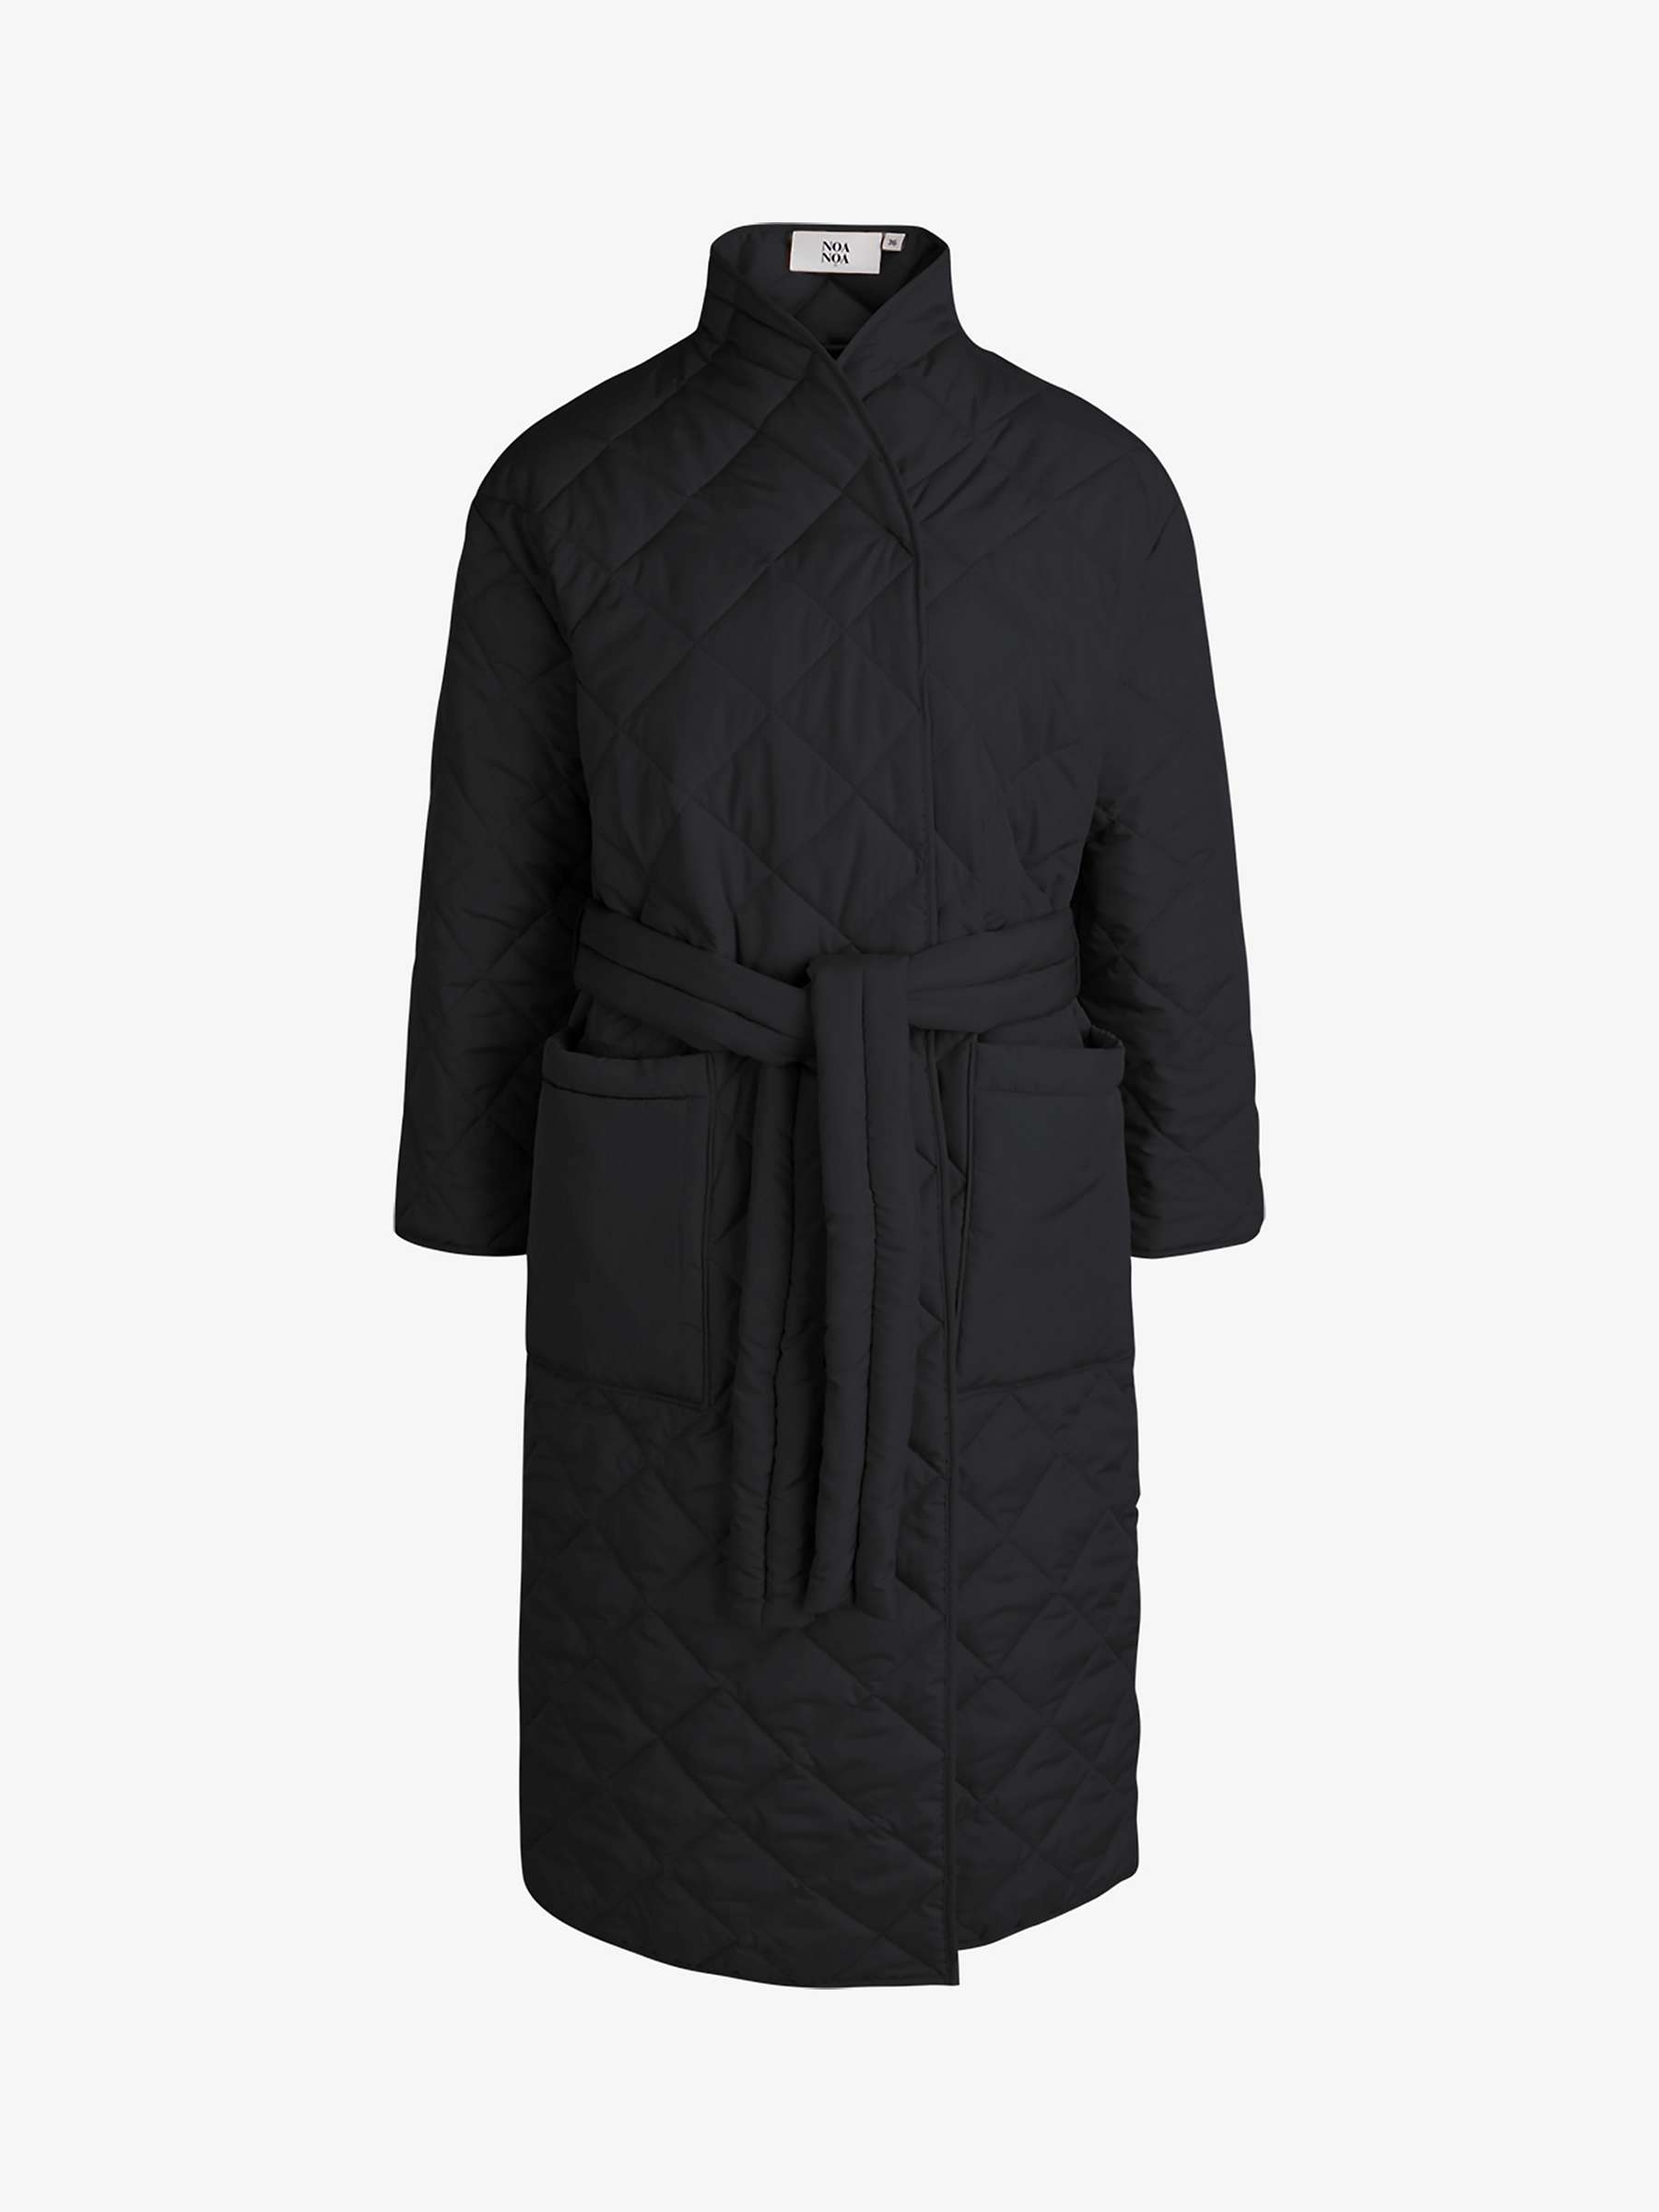 Noa Noa Caisa Quilted Oversized Coat, Black at John Lewis & Partners